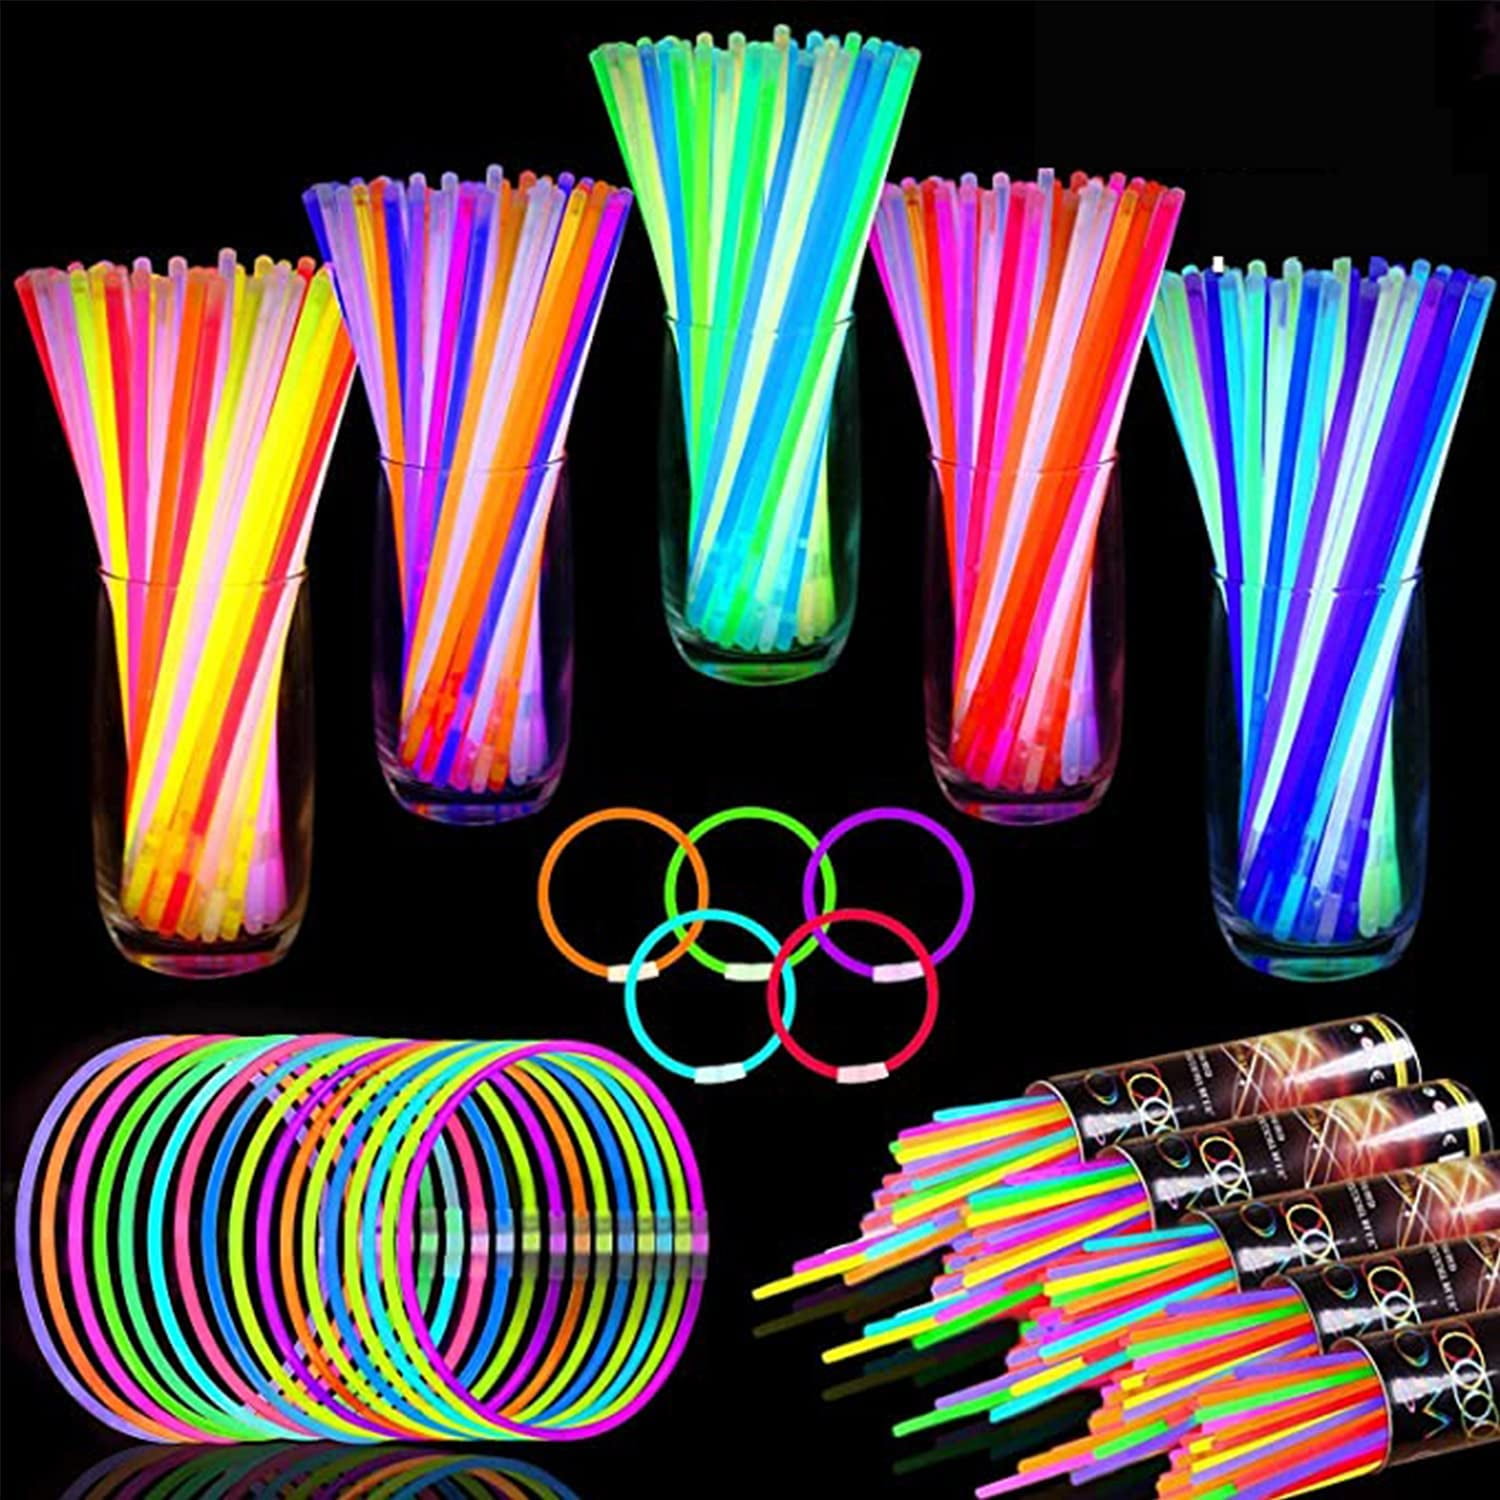 Glasses & More Bracelets July 4th Glow In The Dark Party Favors-Bundle Of 12 